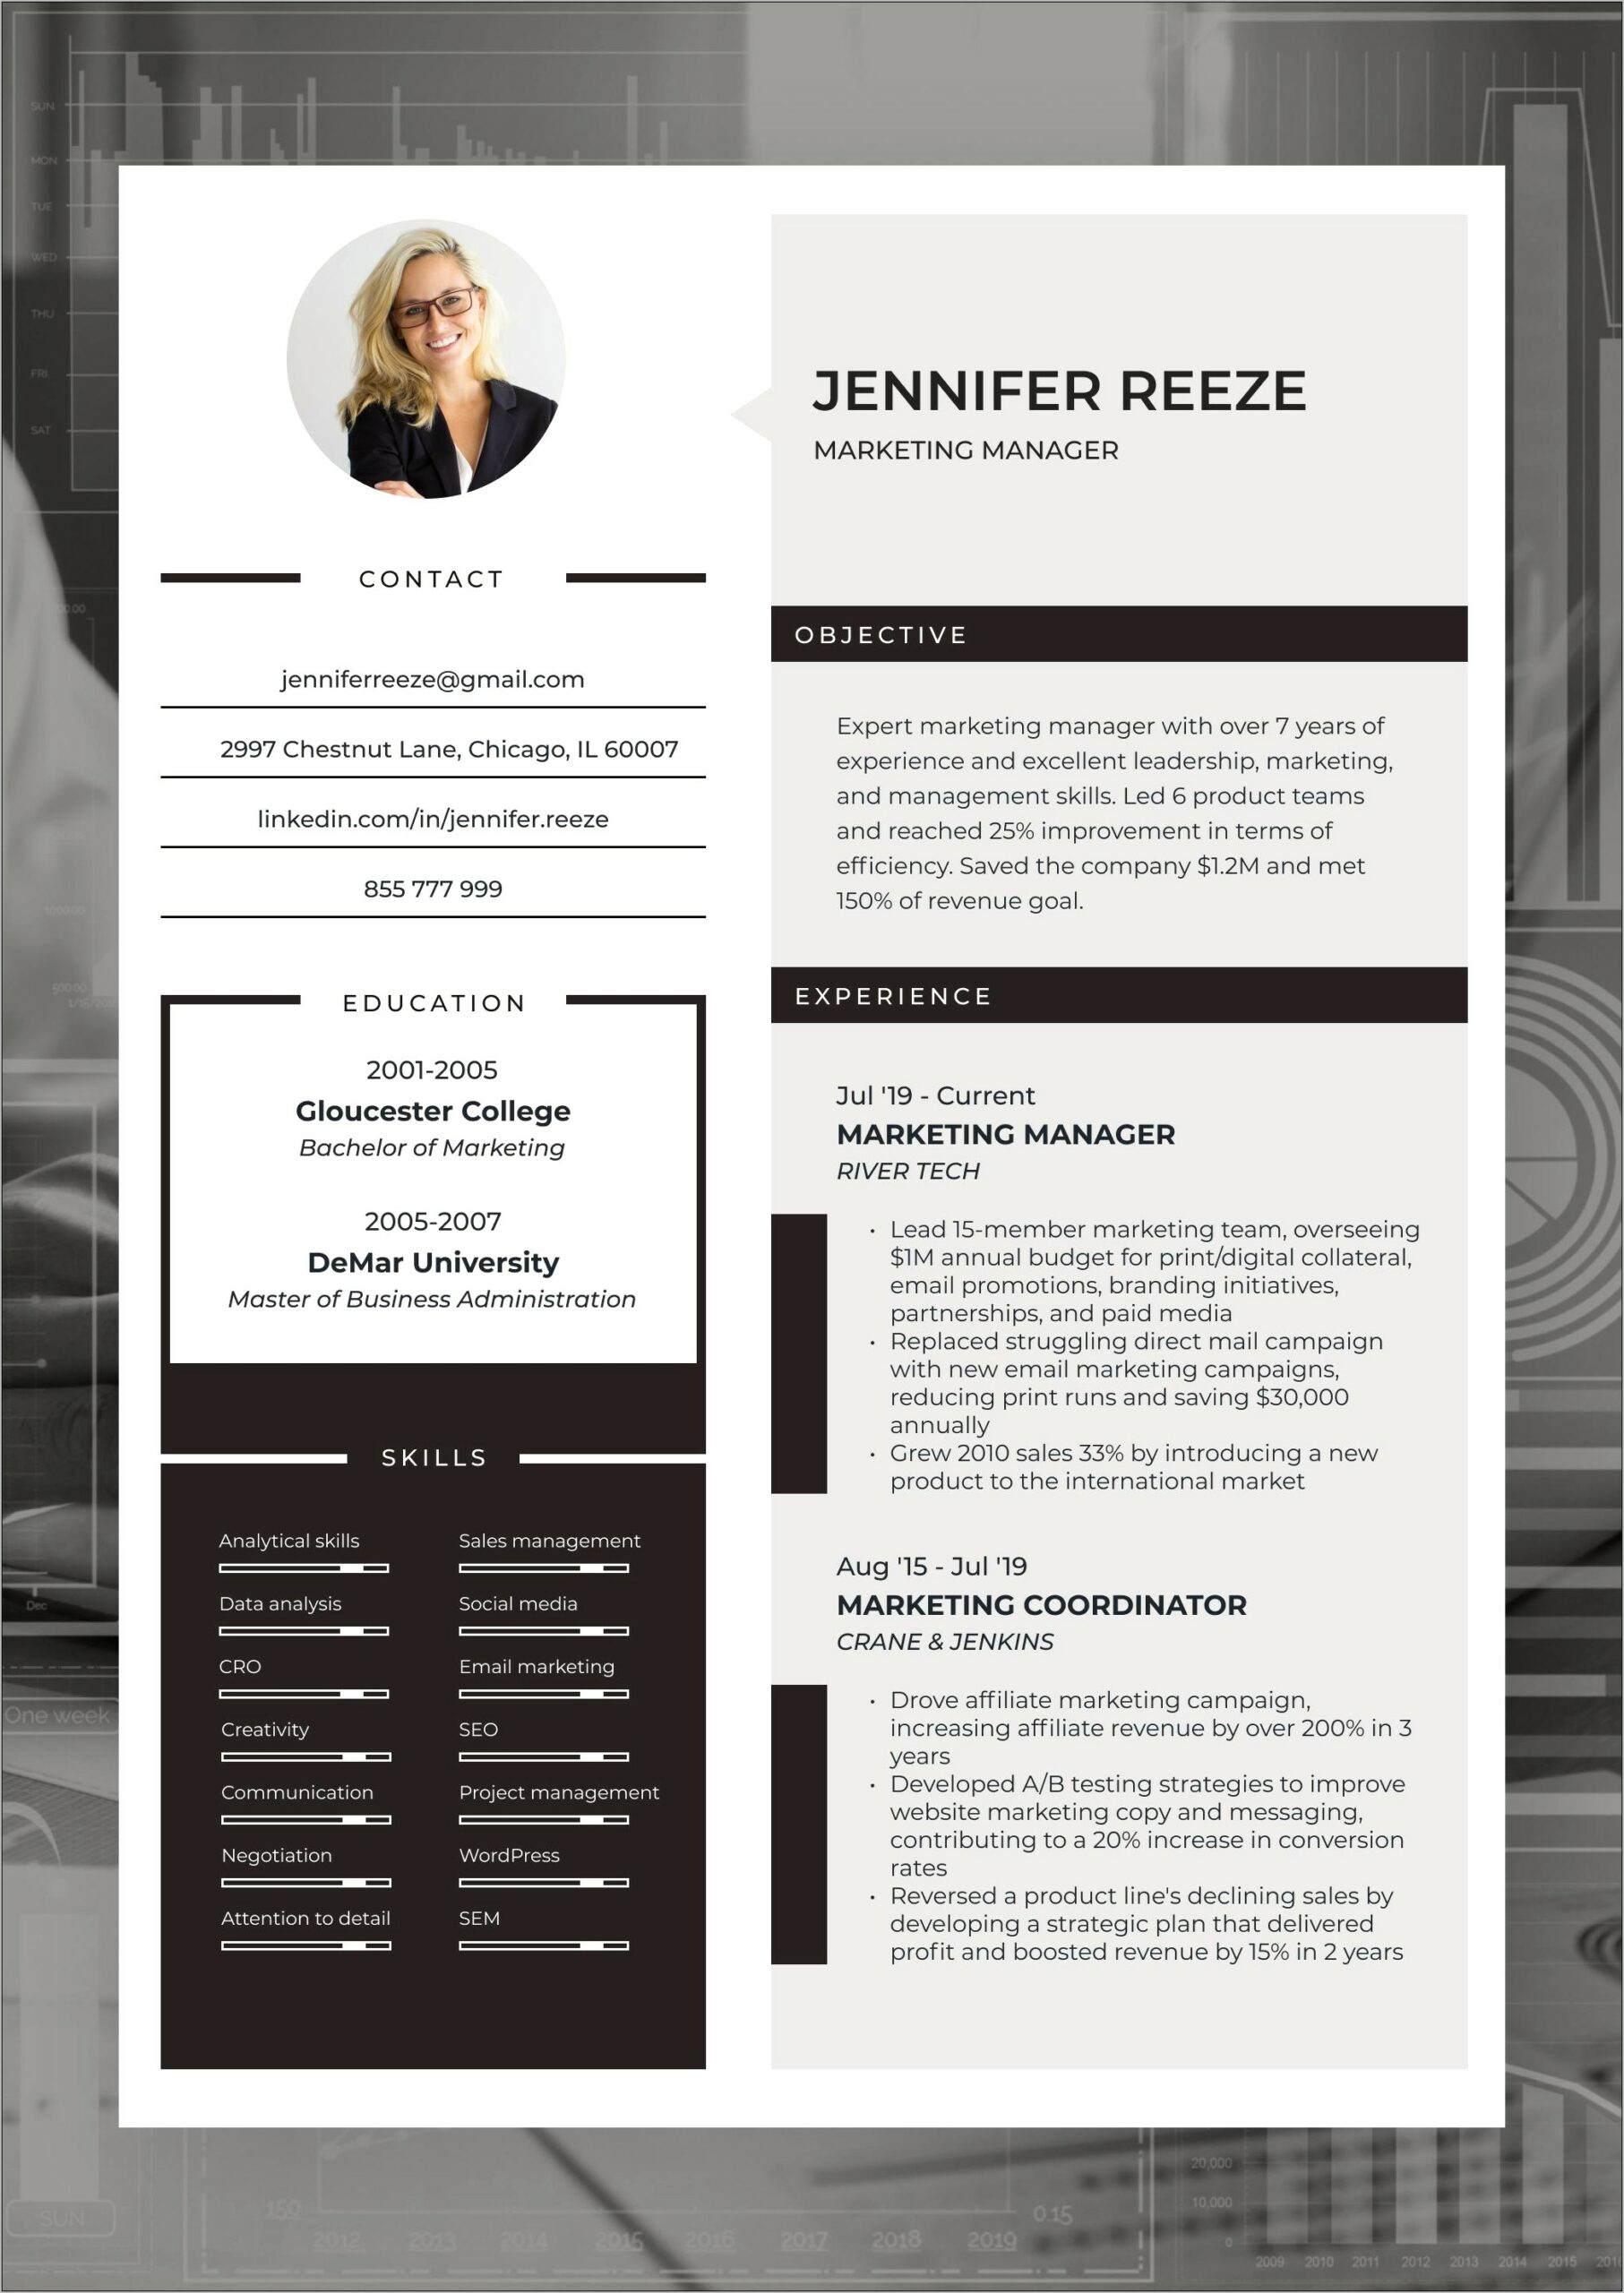 Resume Example For Marketing Specialist